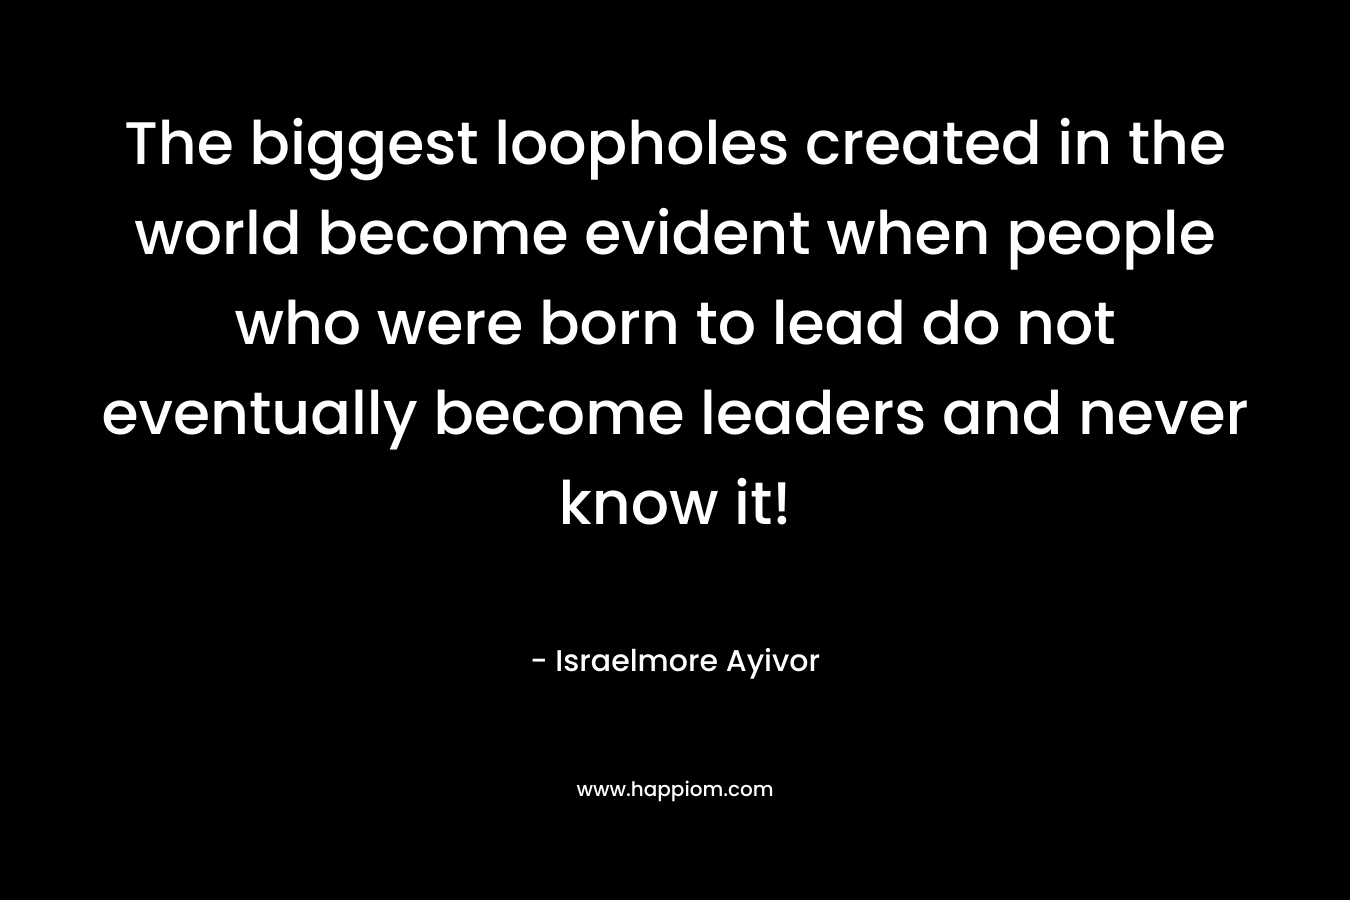 The biggest loopholes created in the world become evident when people who were born to lead do not eventually become leaders and never know it!